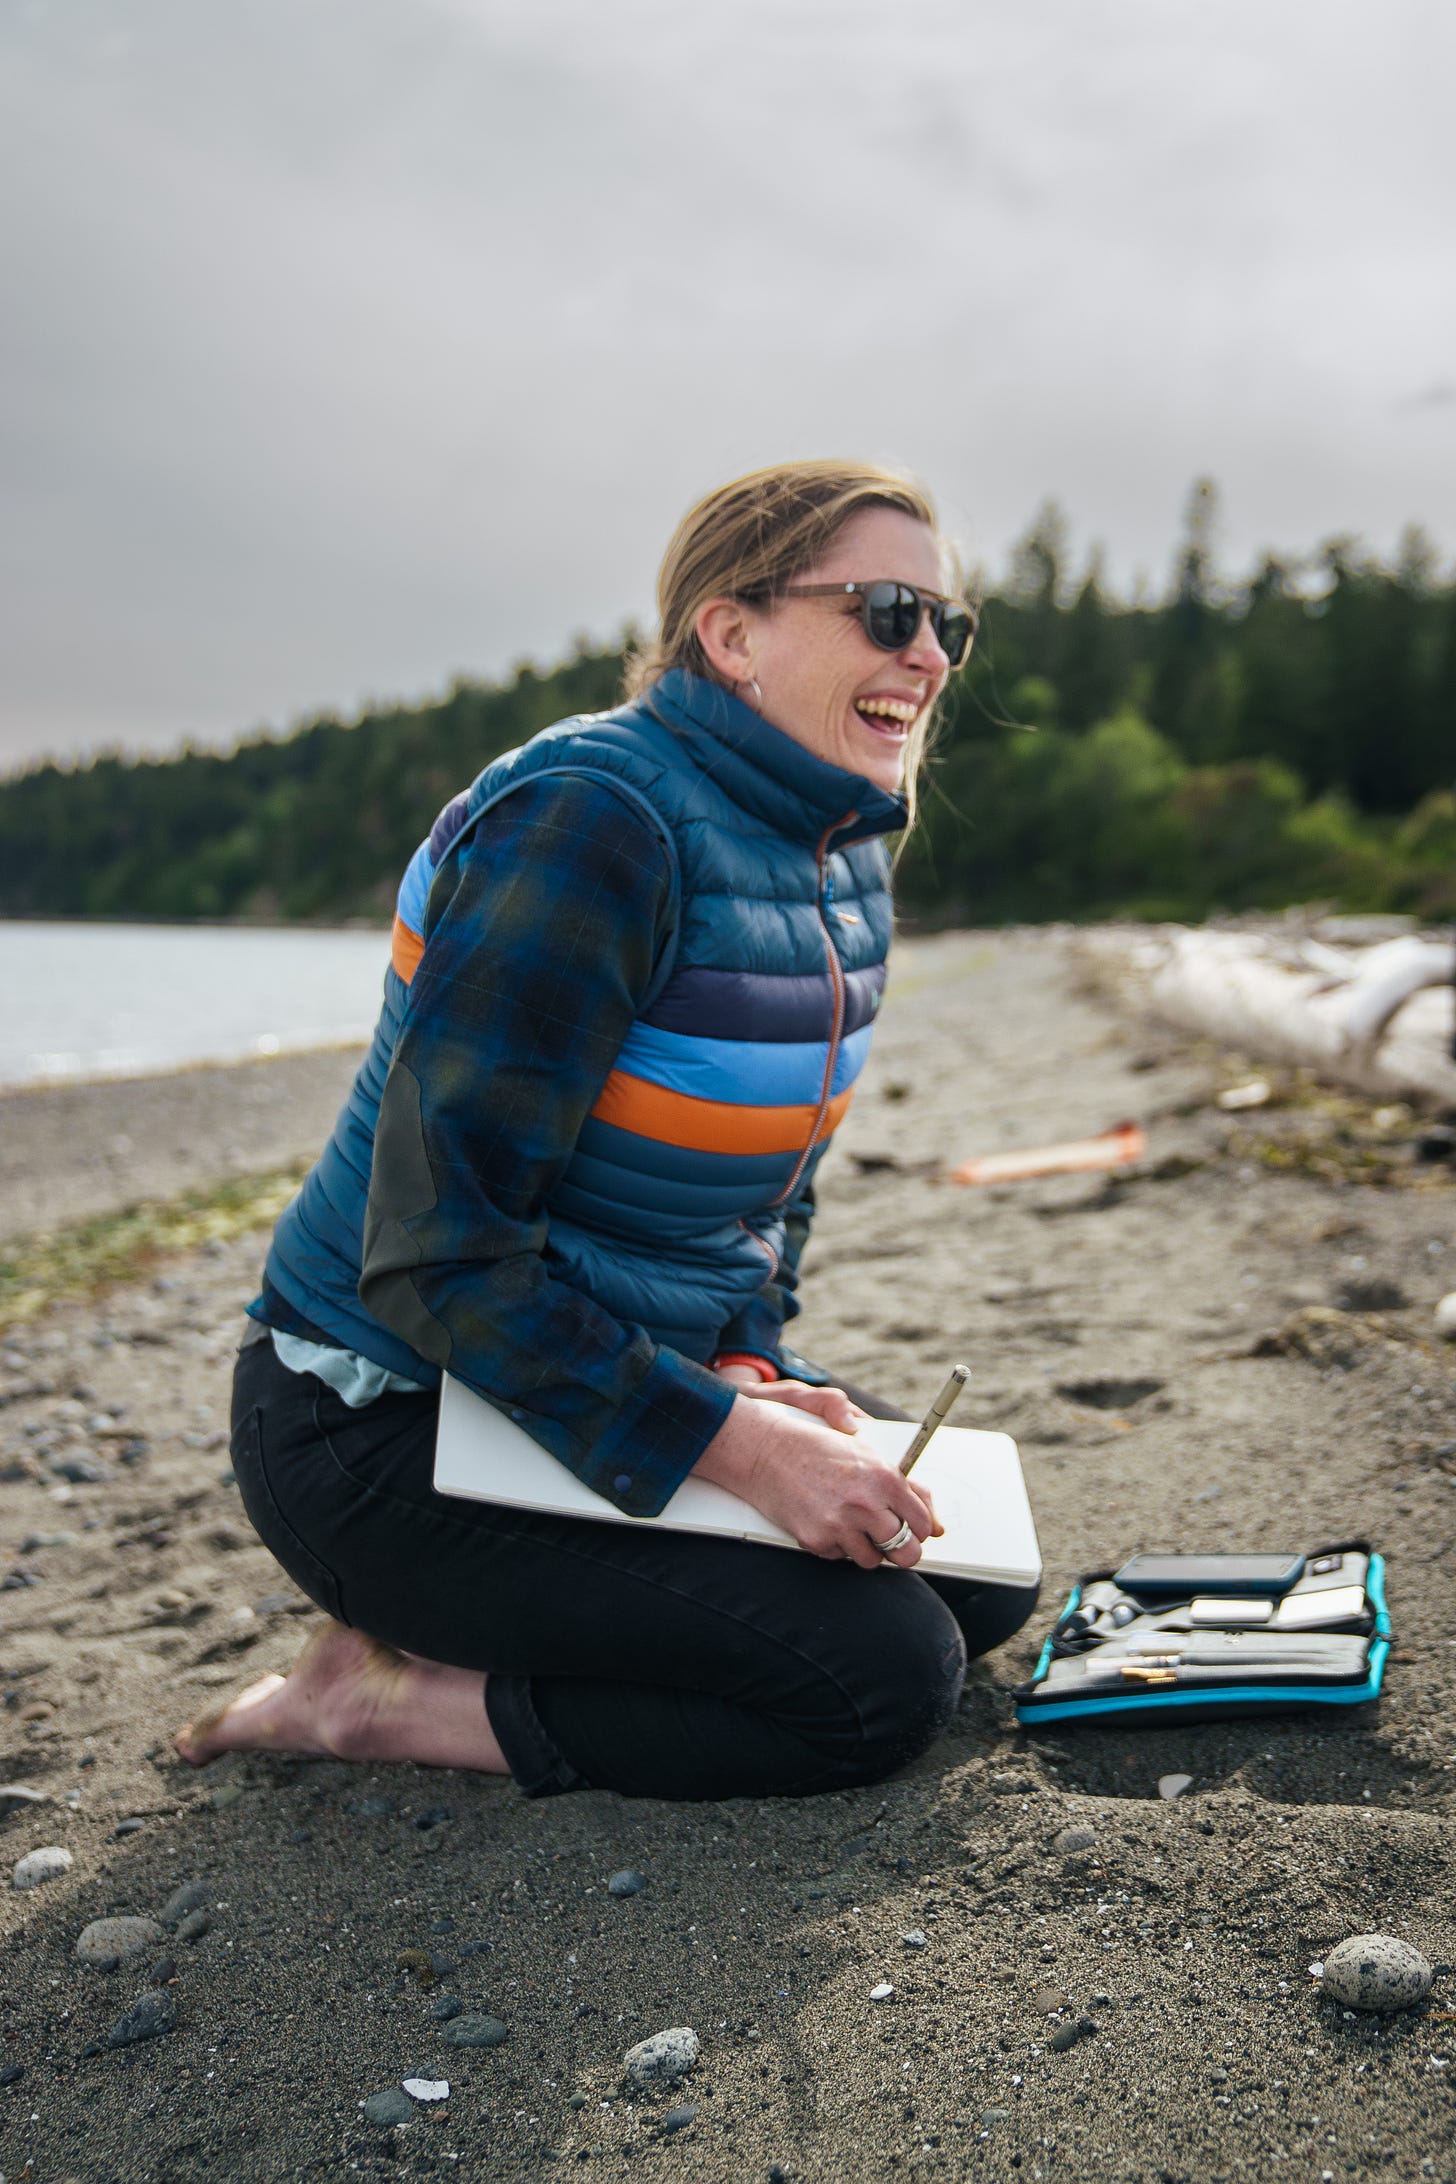 A photo of the artist Anna Brones, sitting on a sandy beach with trees and water behind her, and a notebook and pen in her hand, laughing and smiling 